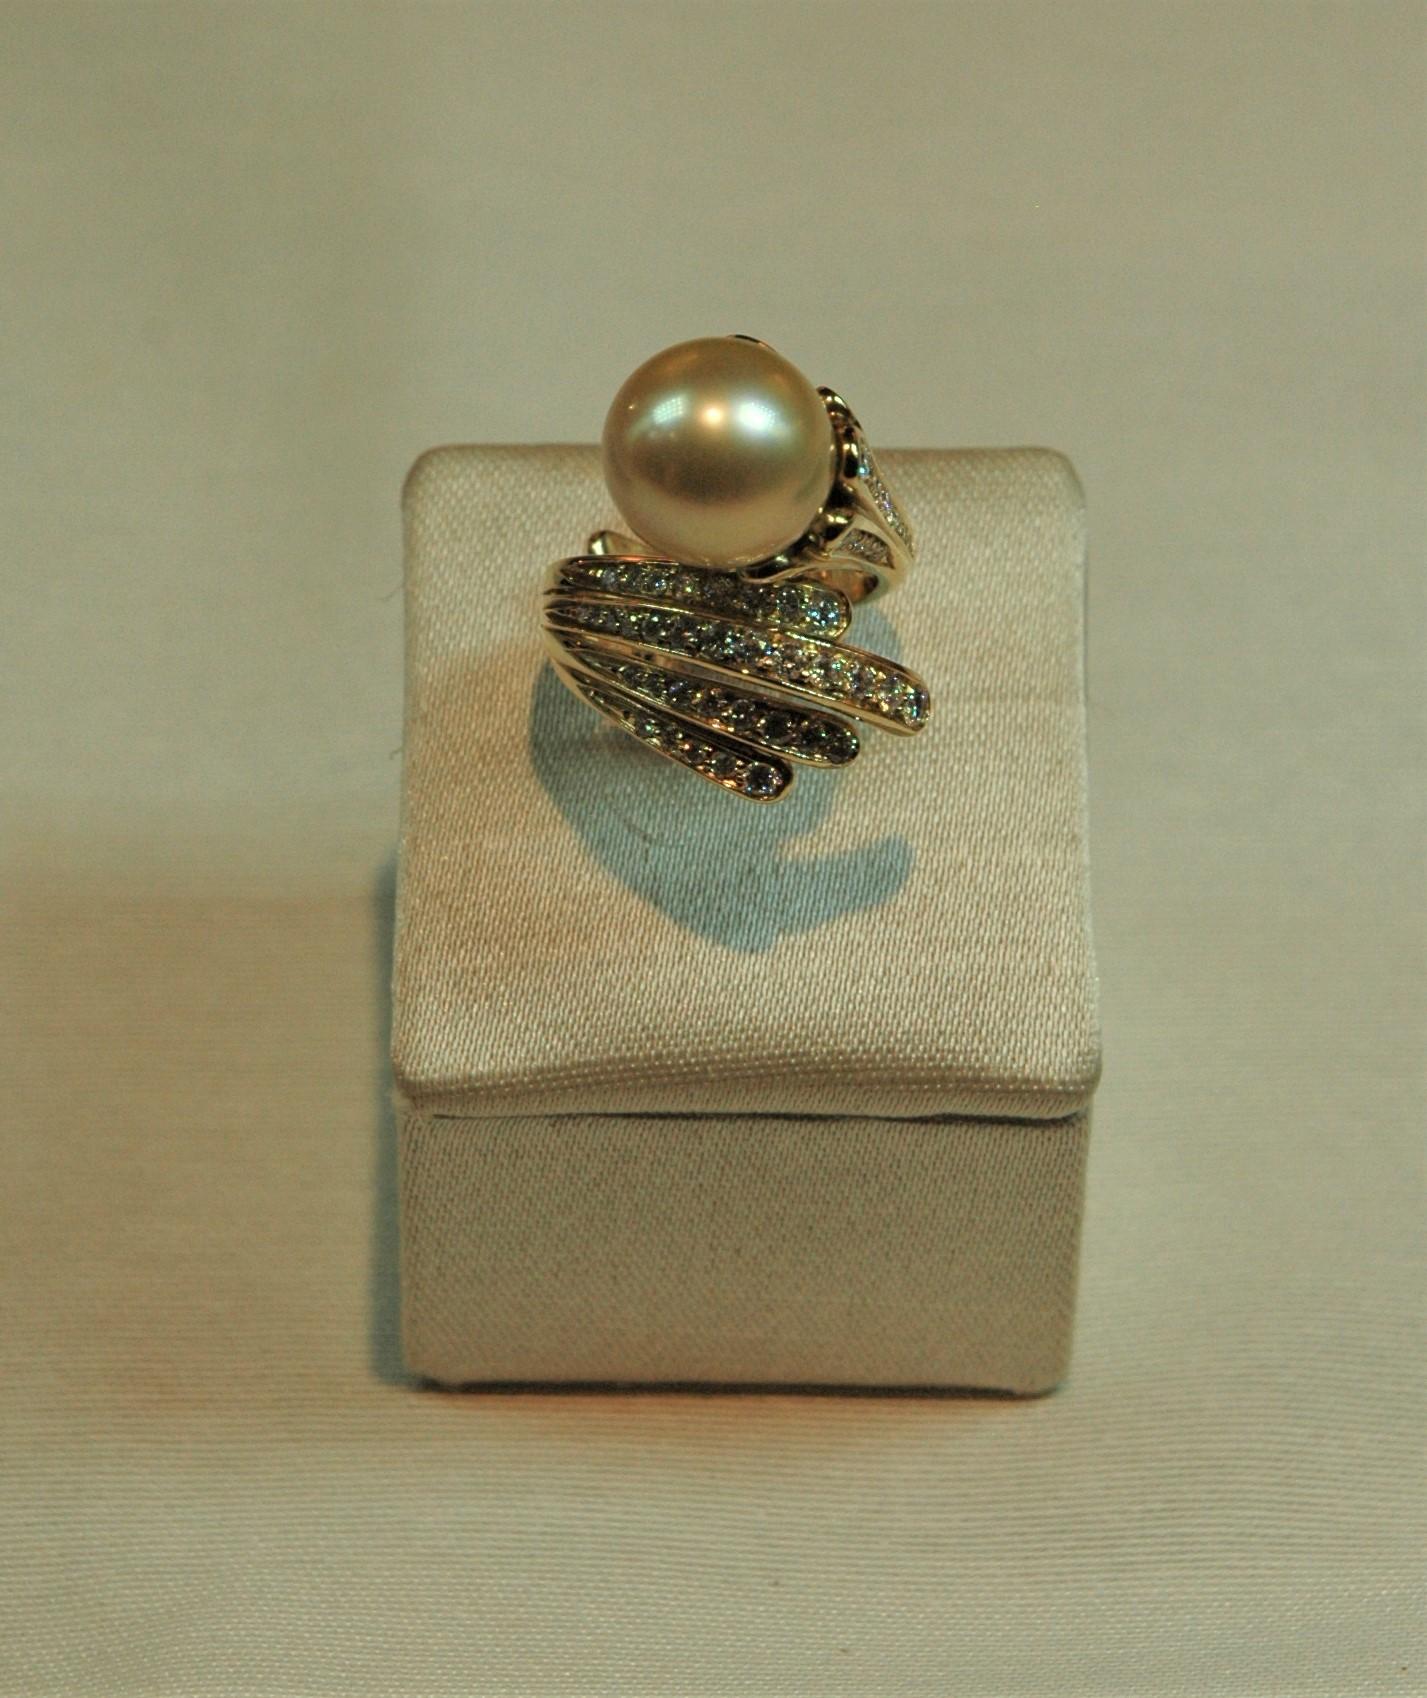 Brilliant Cut 1.31 Carats Diamonds Yellow Gold Golden Pearl Cocktail Ring, Italy Handmade For Sale